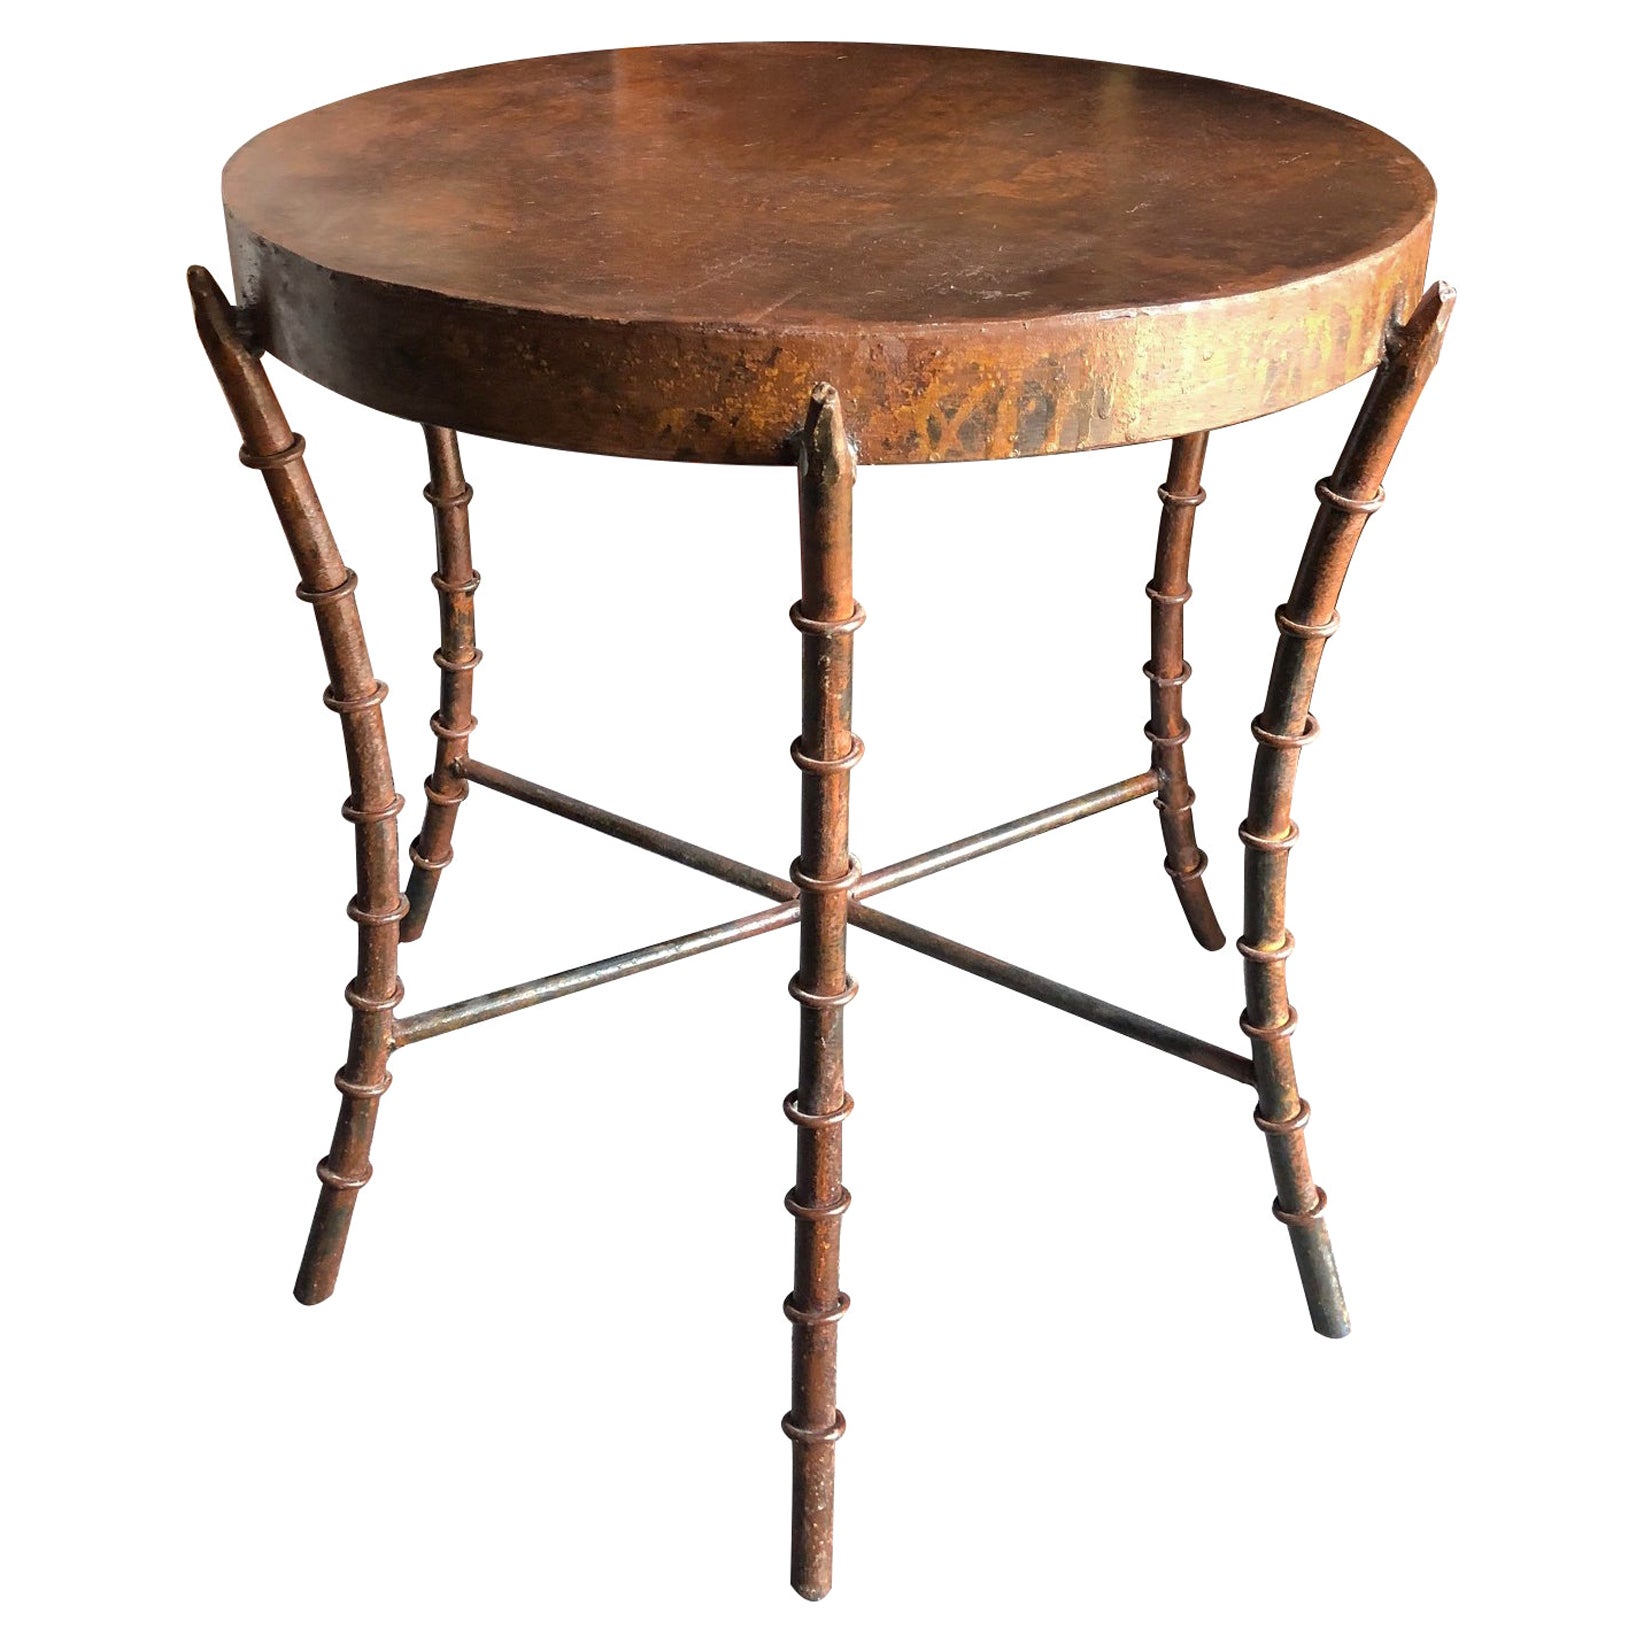 Vintage Oxidized Iron Faux Bamboo Circular Side Table